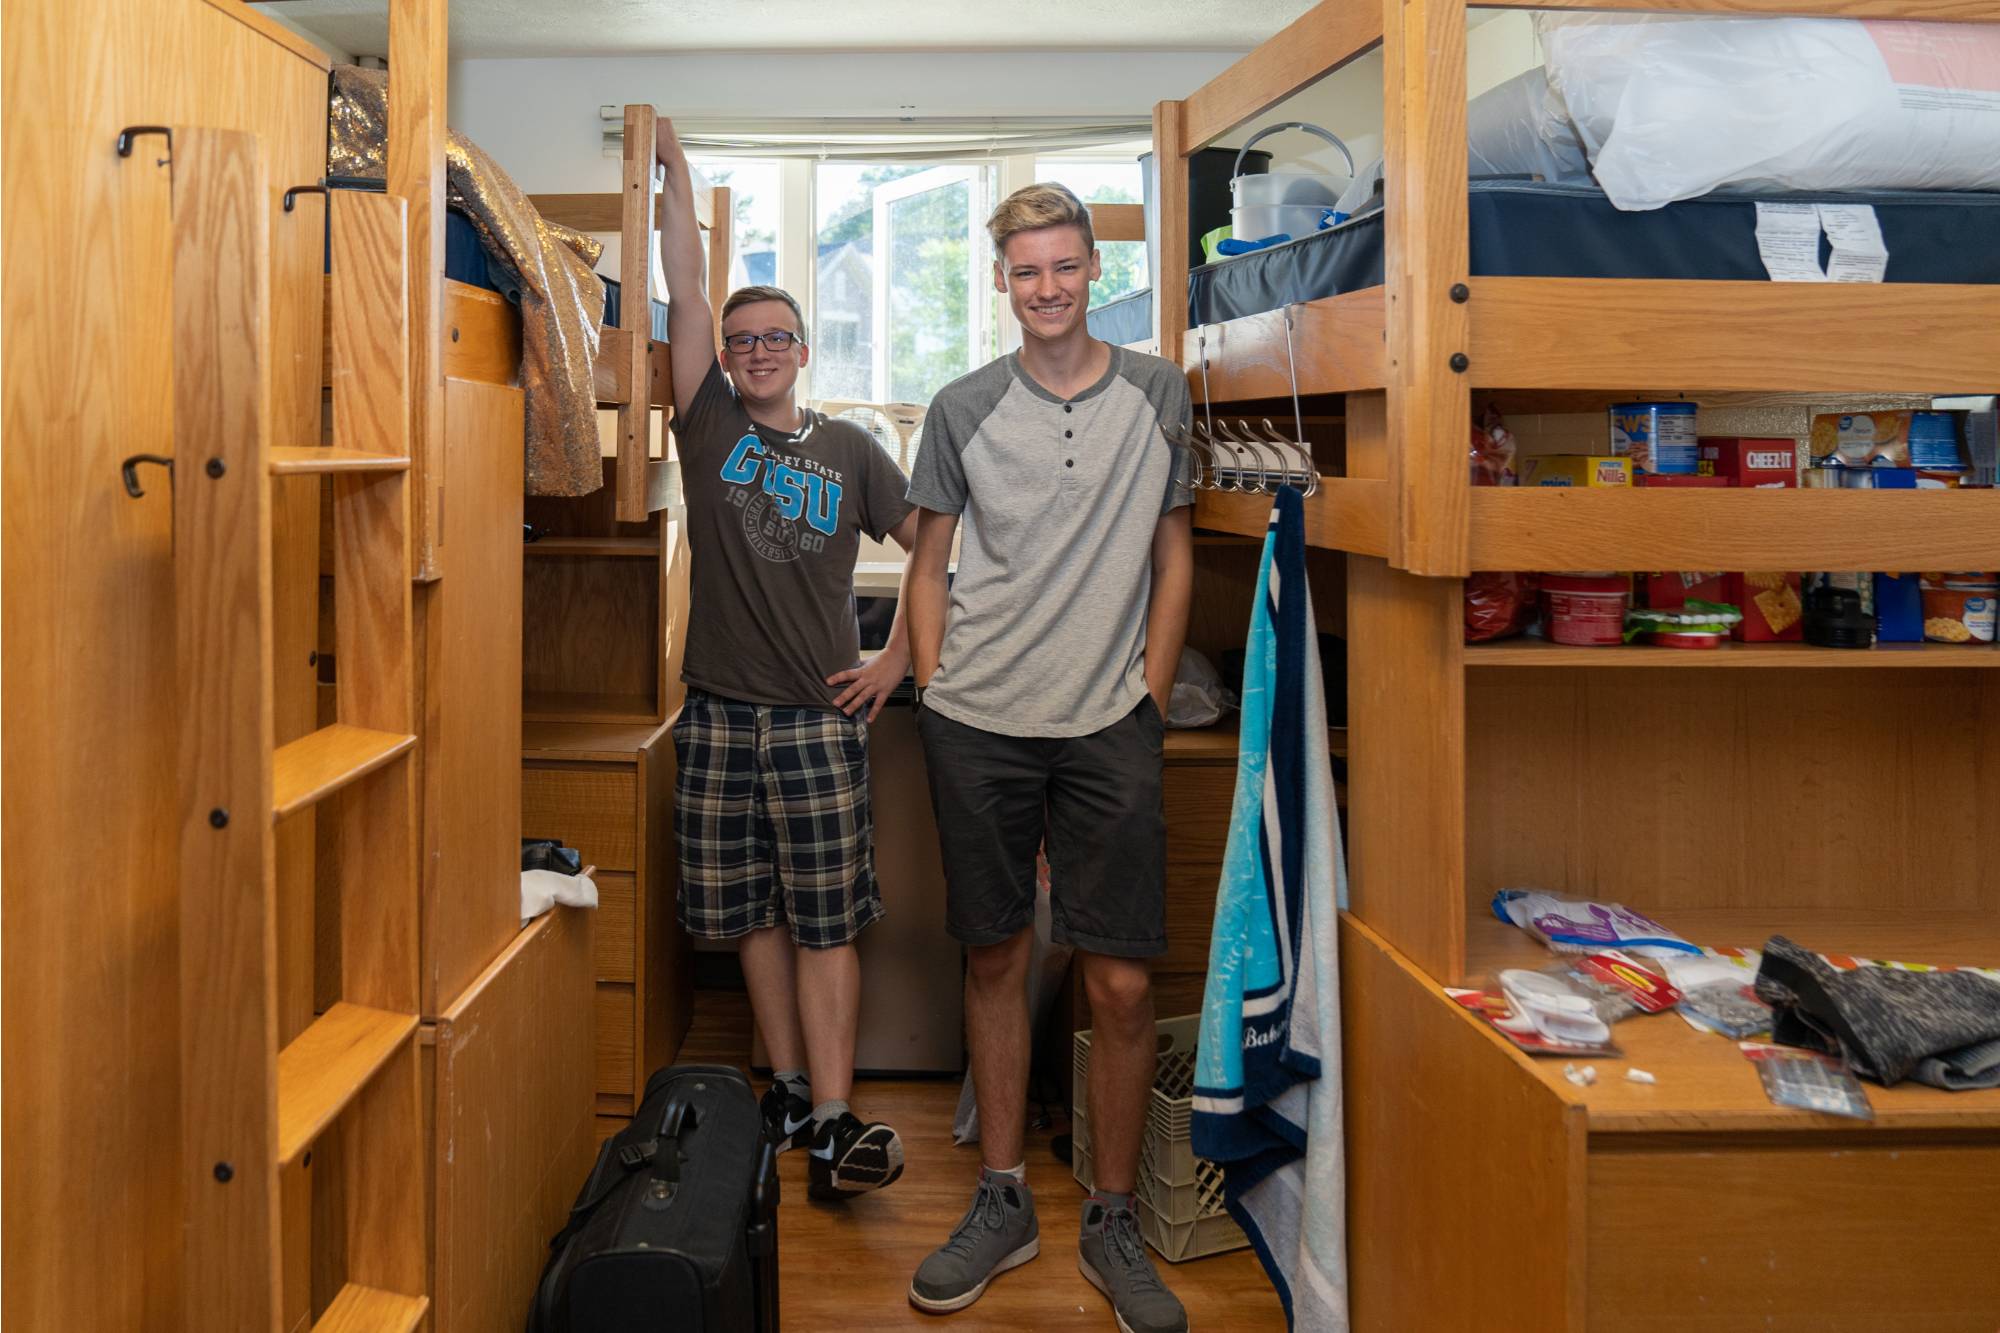 Two roommates on move-in day.